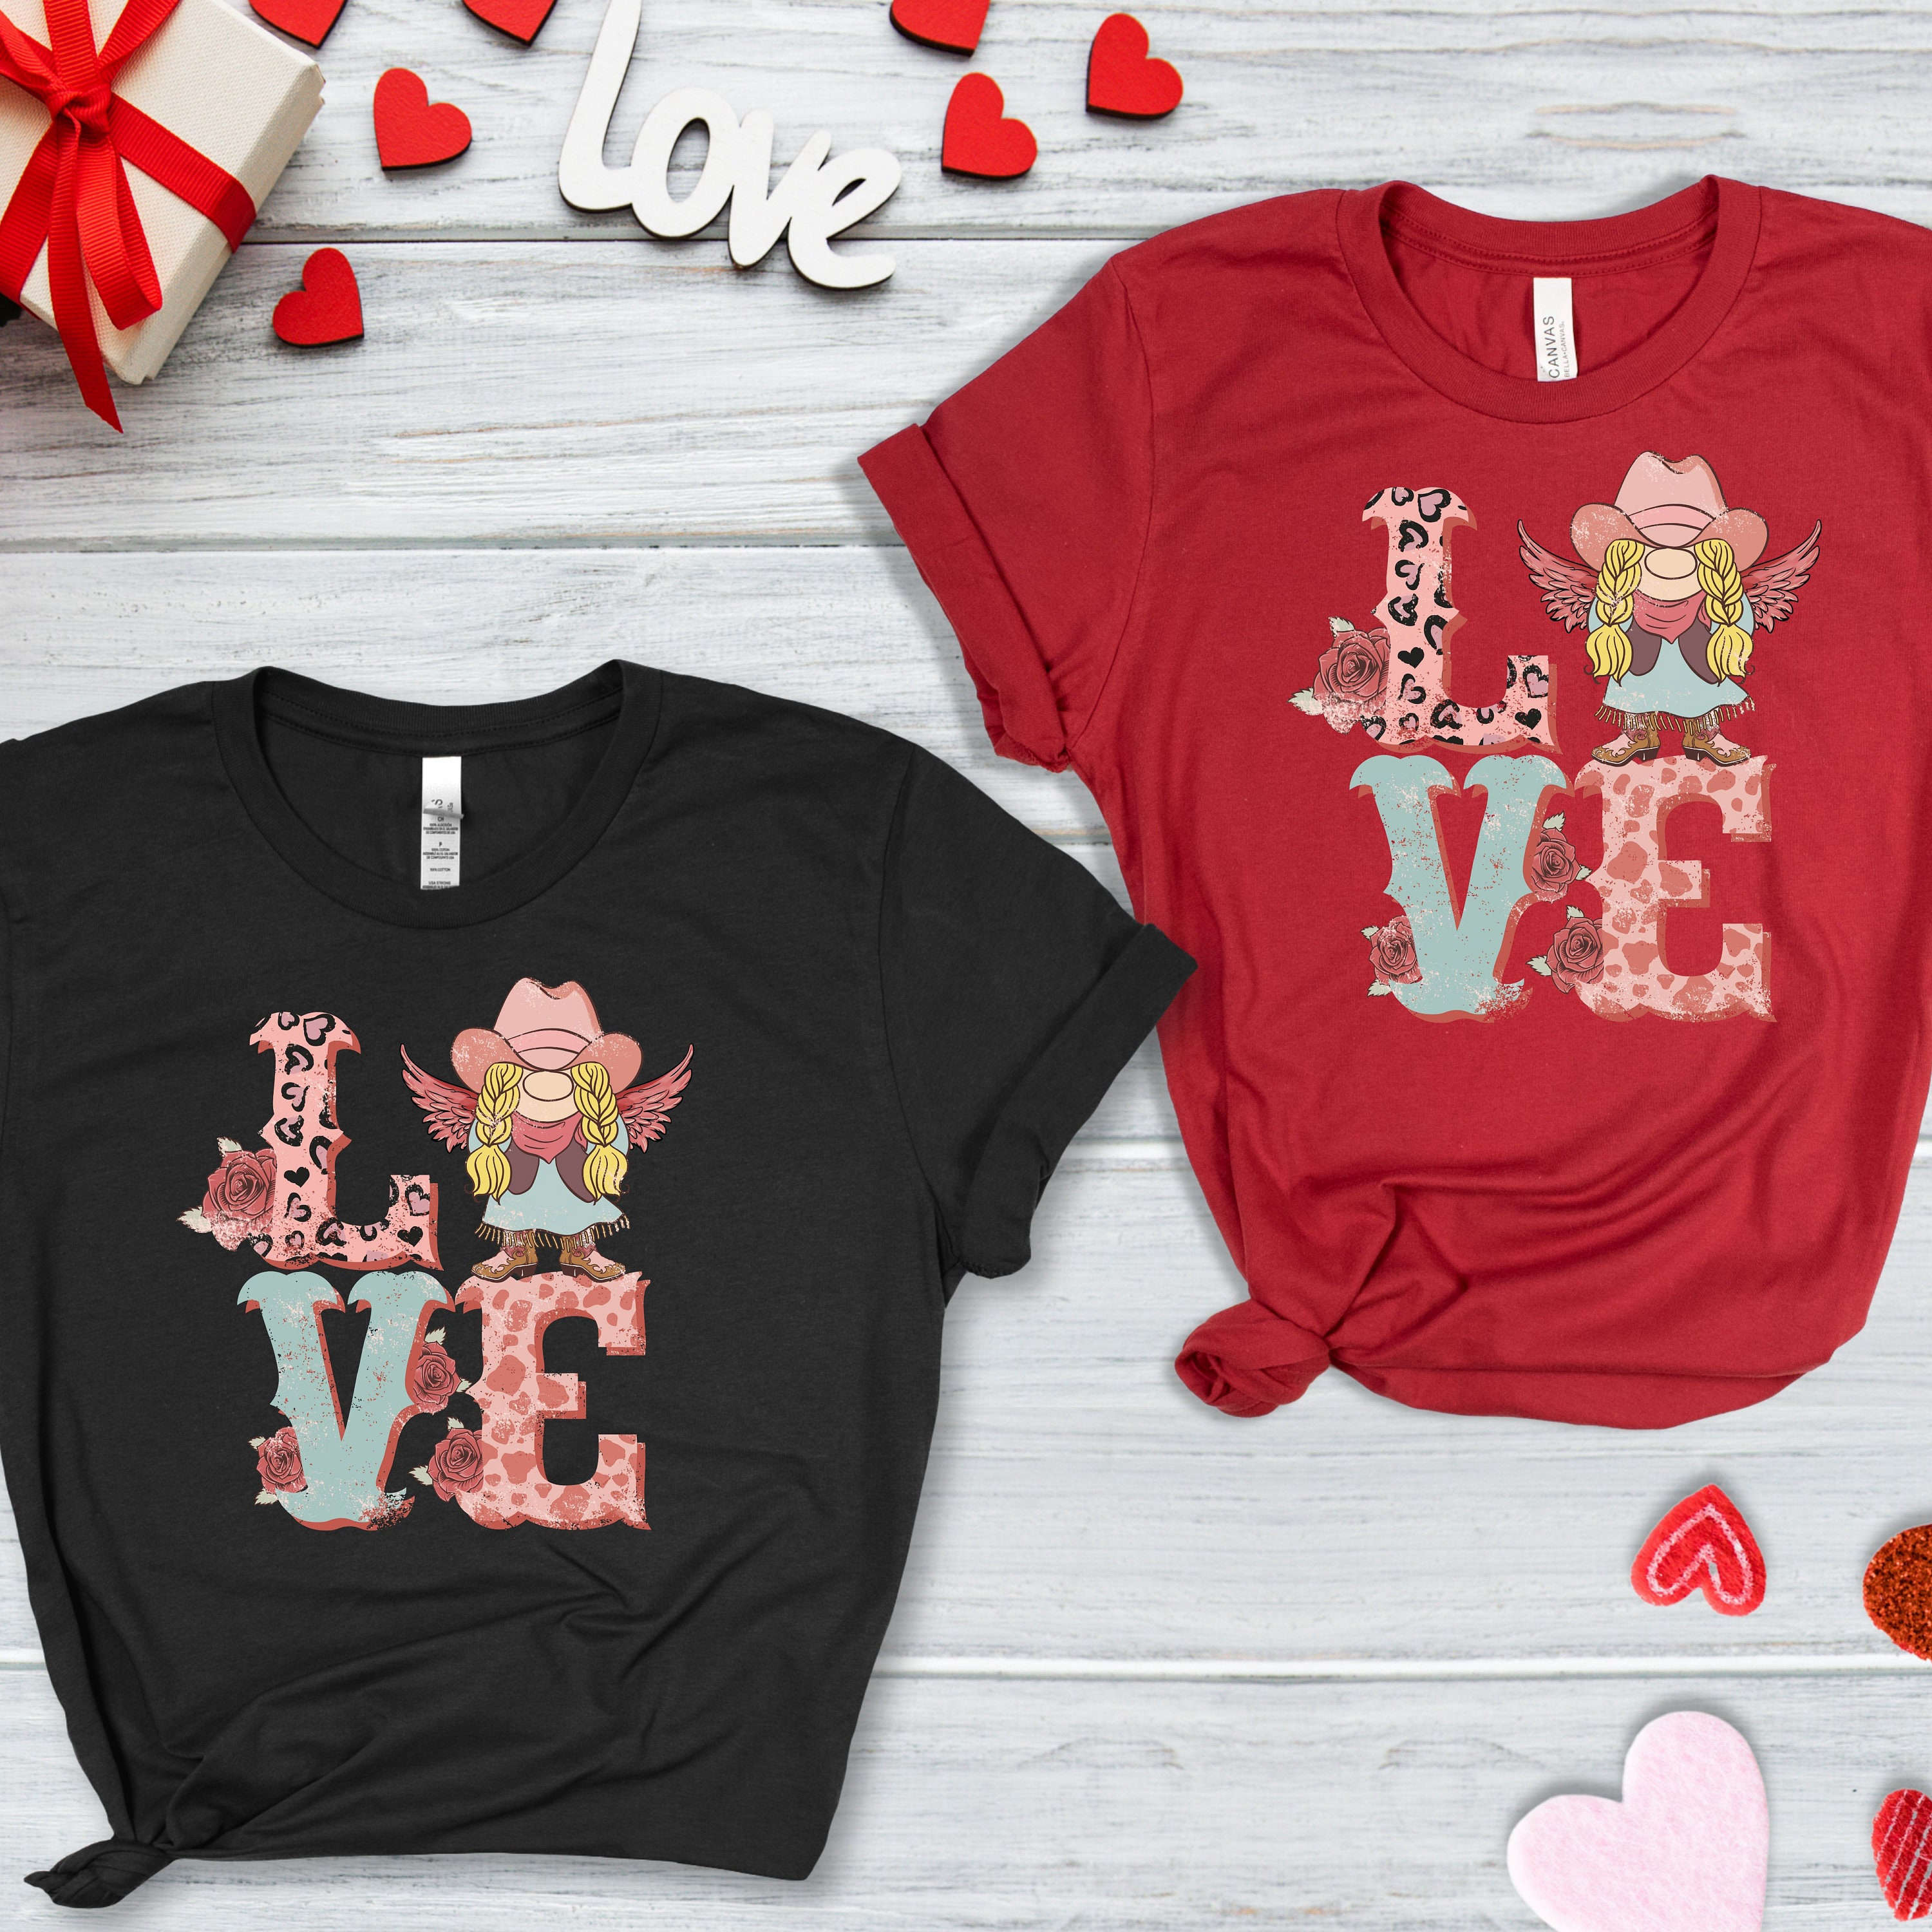 Retro Cowboy Love Shirt: Perfect Valentine s Day Gift for Her Heart Tee for Women